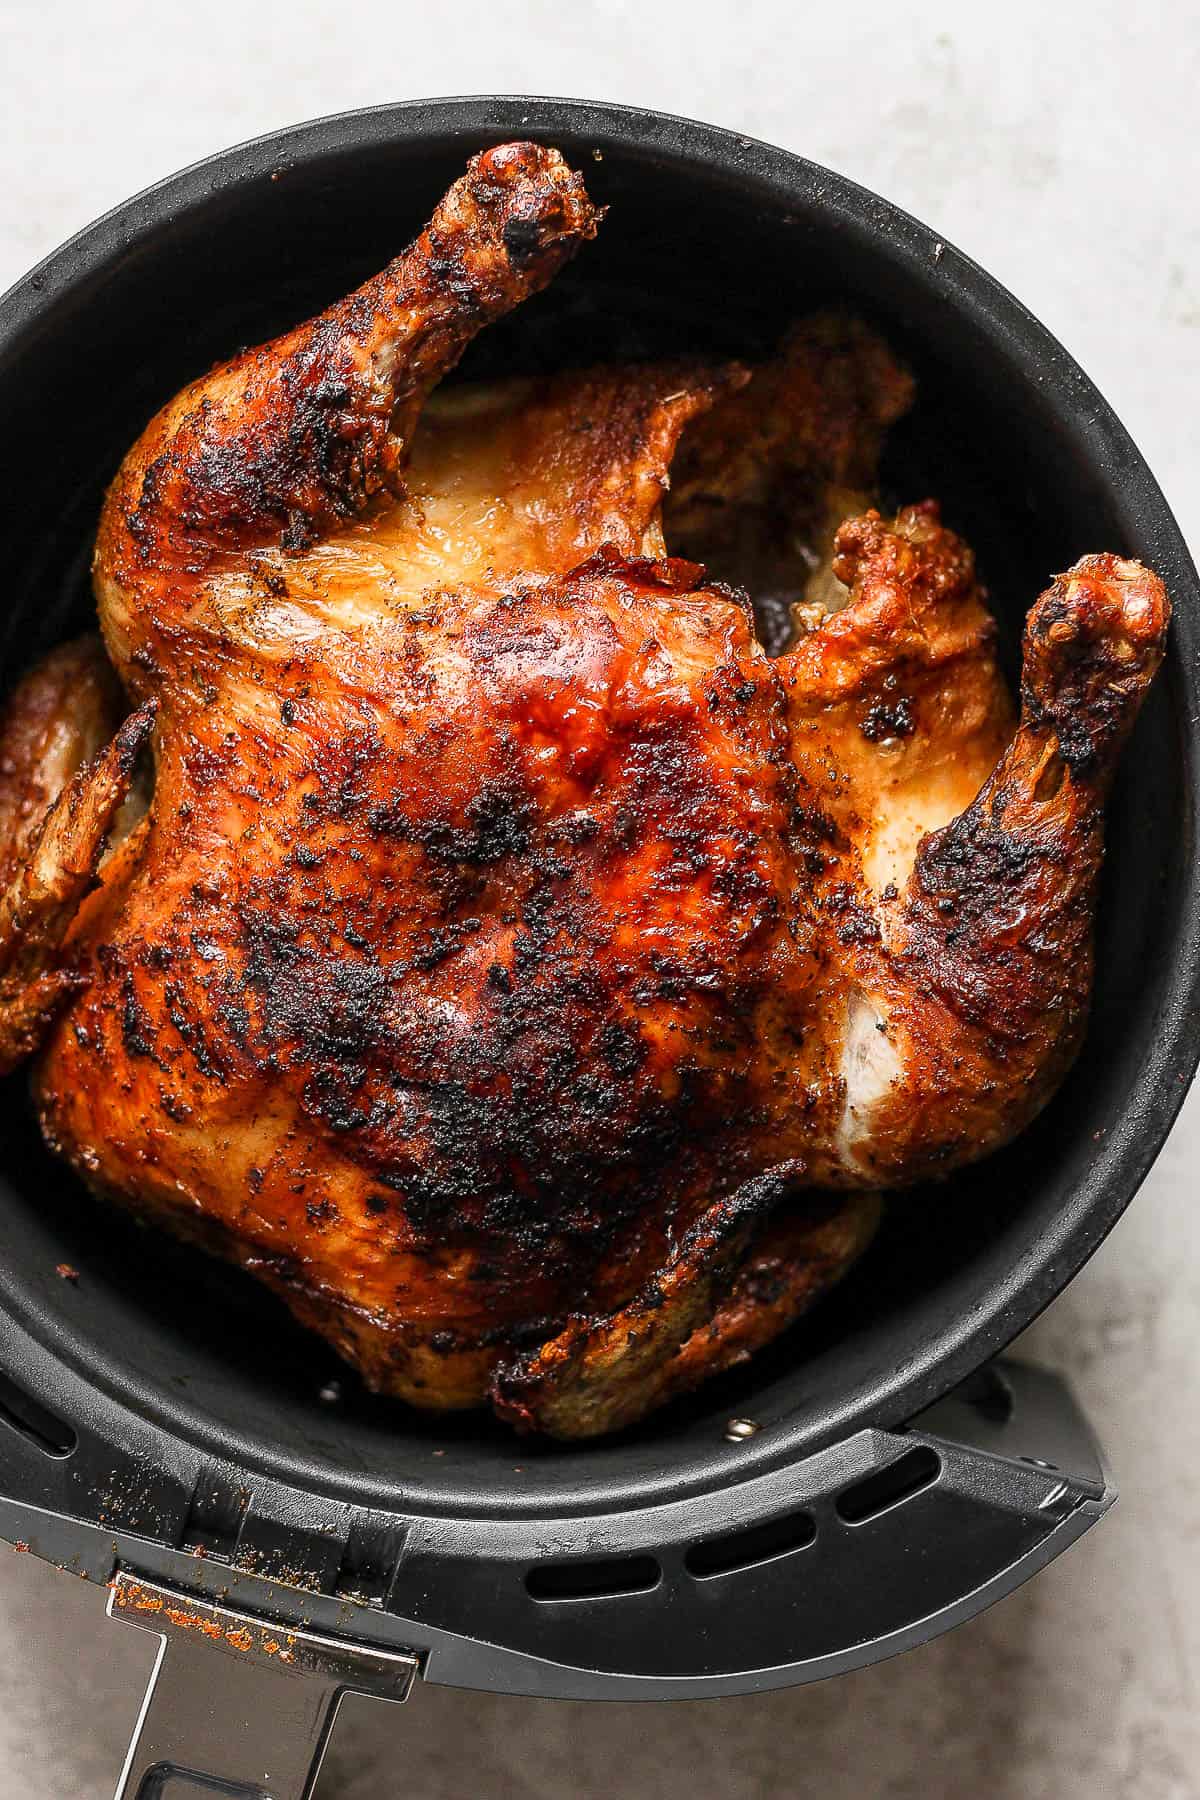 A crispy and golden air fryer whole chicken resting on a table.